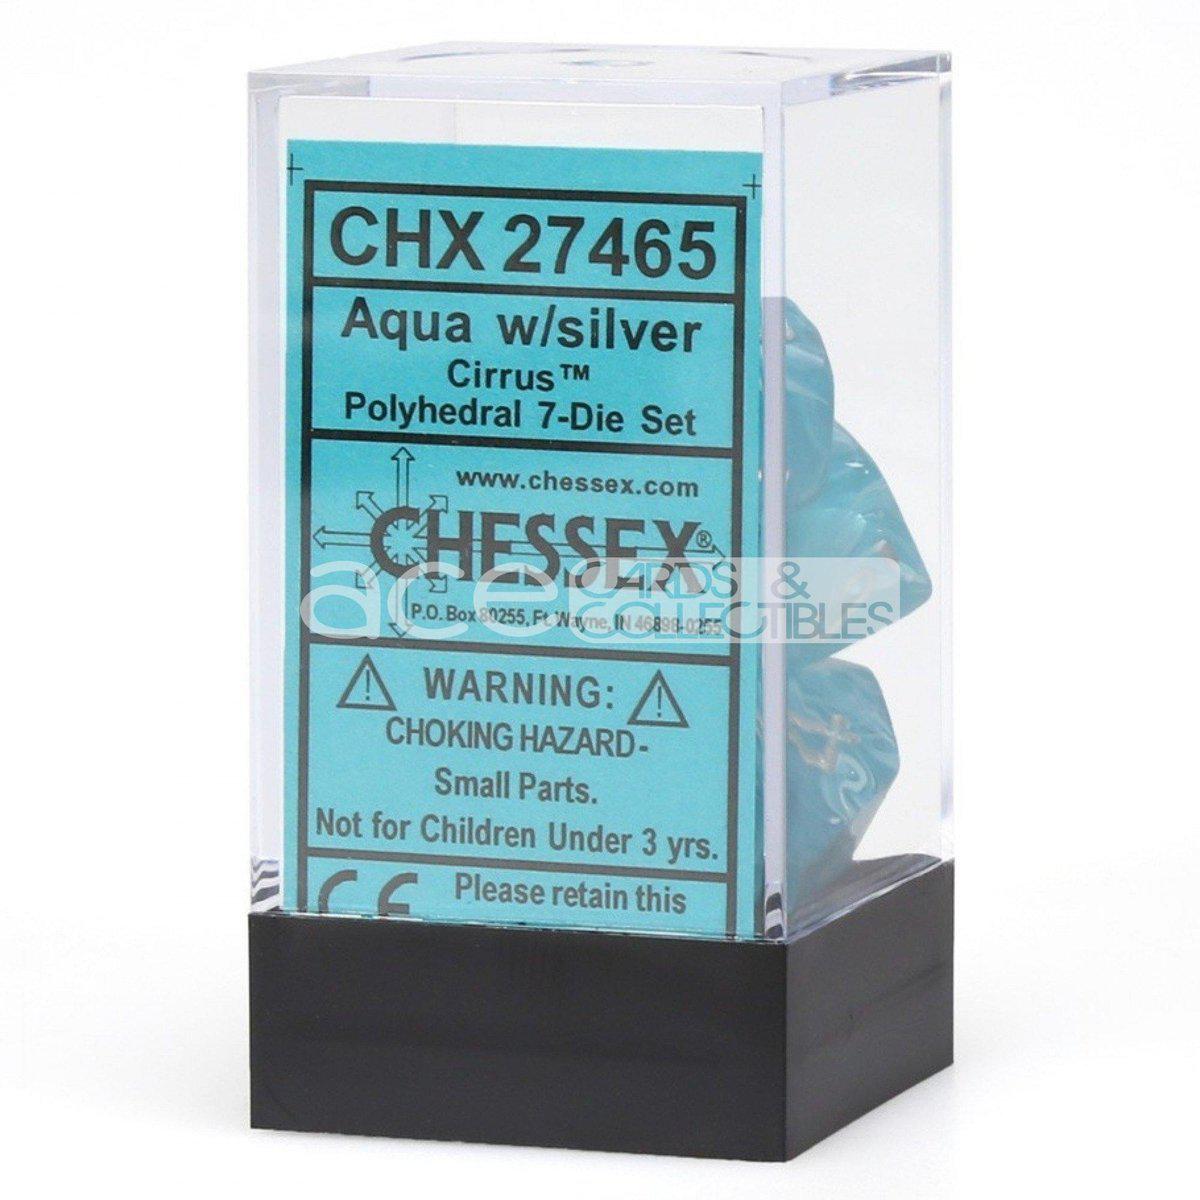 Chessex Cirrus™ Polyhedral 7pcs Dice (Aqua/Silver) [CHX27465]-Chessex-Ace Cards & Collectibles